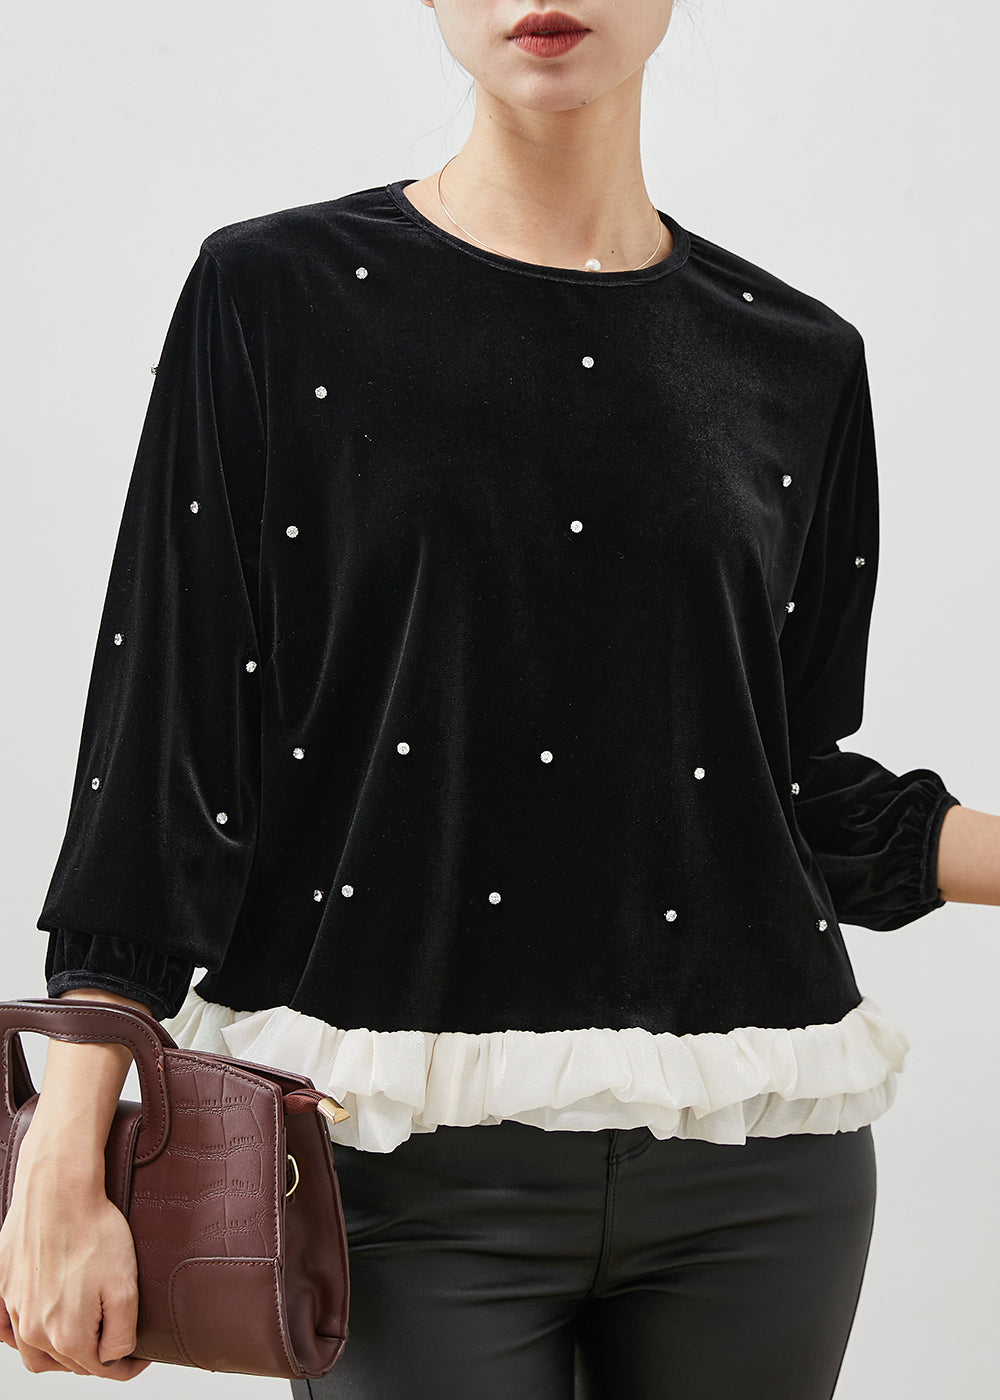 Fine Black Ruffled Patchwork Nail Bead Velour Blouse Tops Spring YU1055